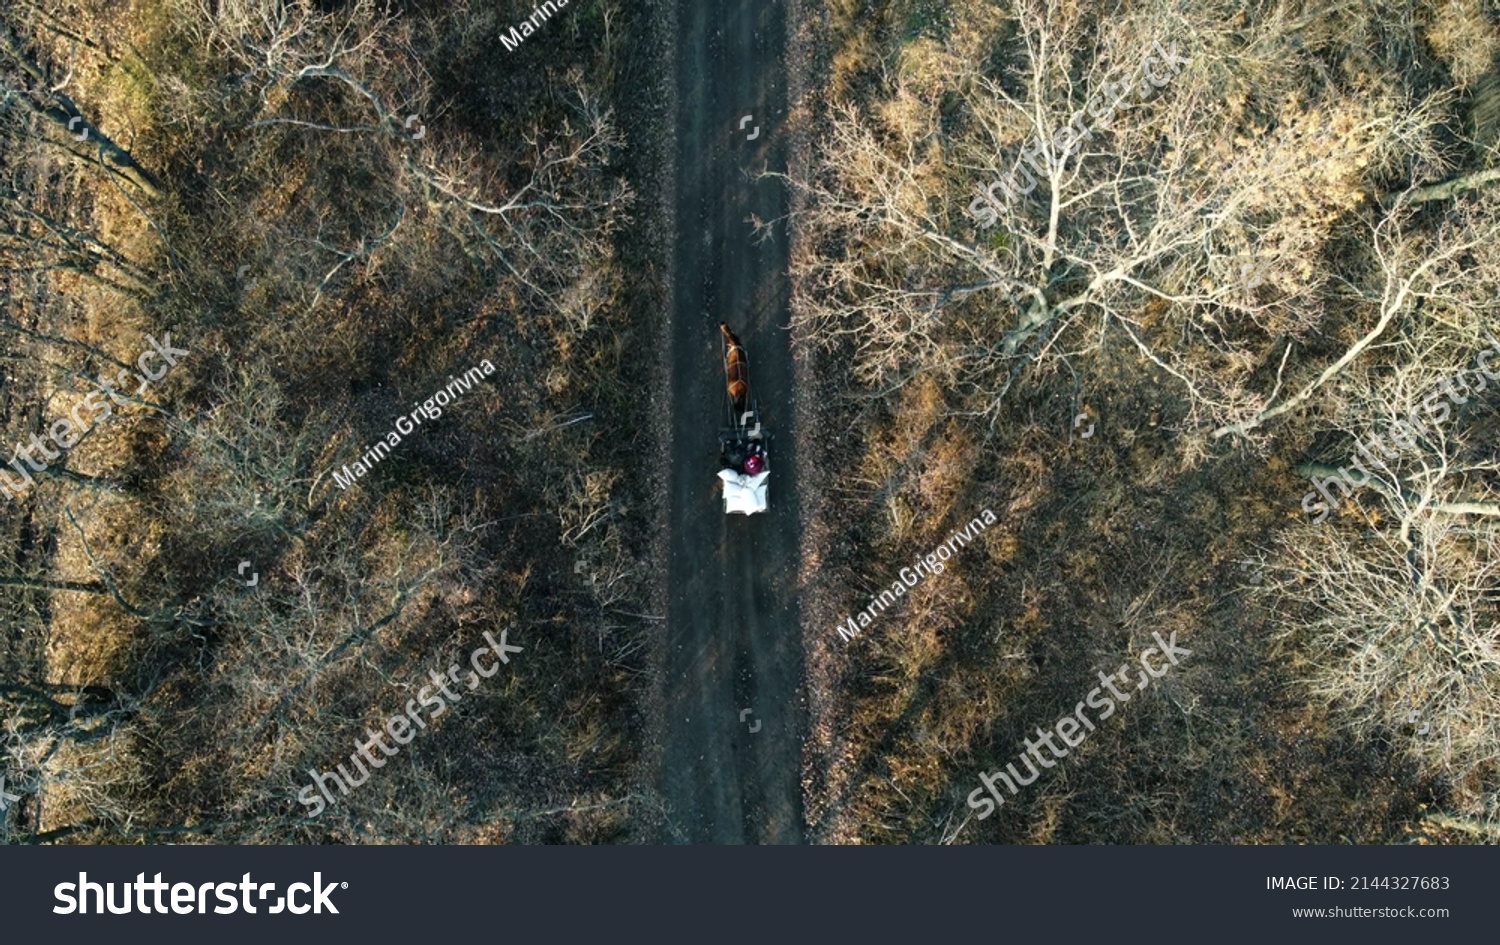 Aerial Drone View Flight Over horse-drawn cart with people and white bags that rides along dirt road between trees on sunny day. Horse-drawn transport, transportation. Old authentic rural countryside #2144327683